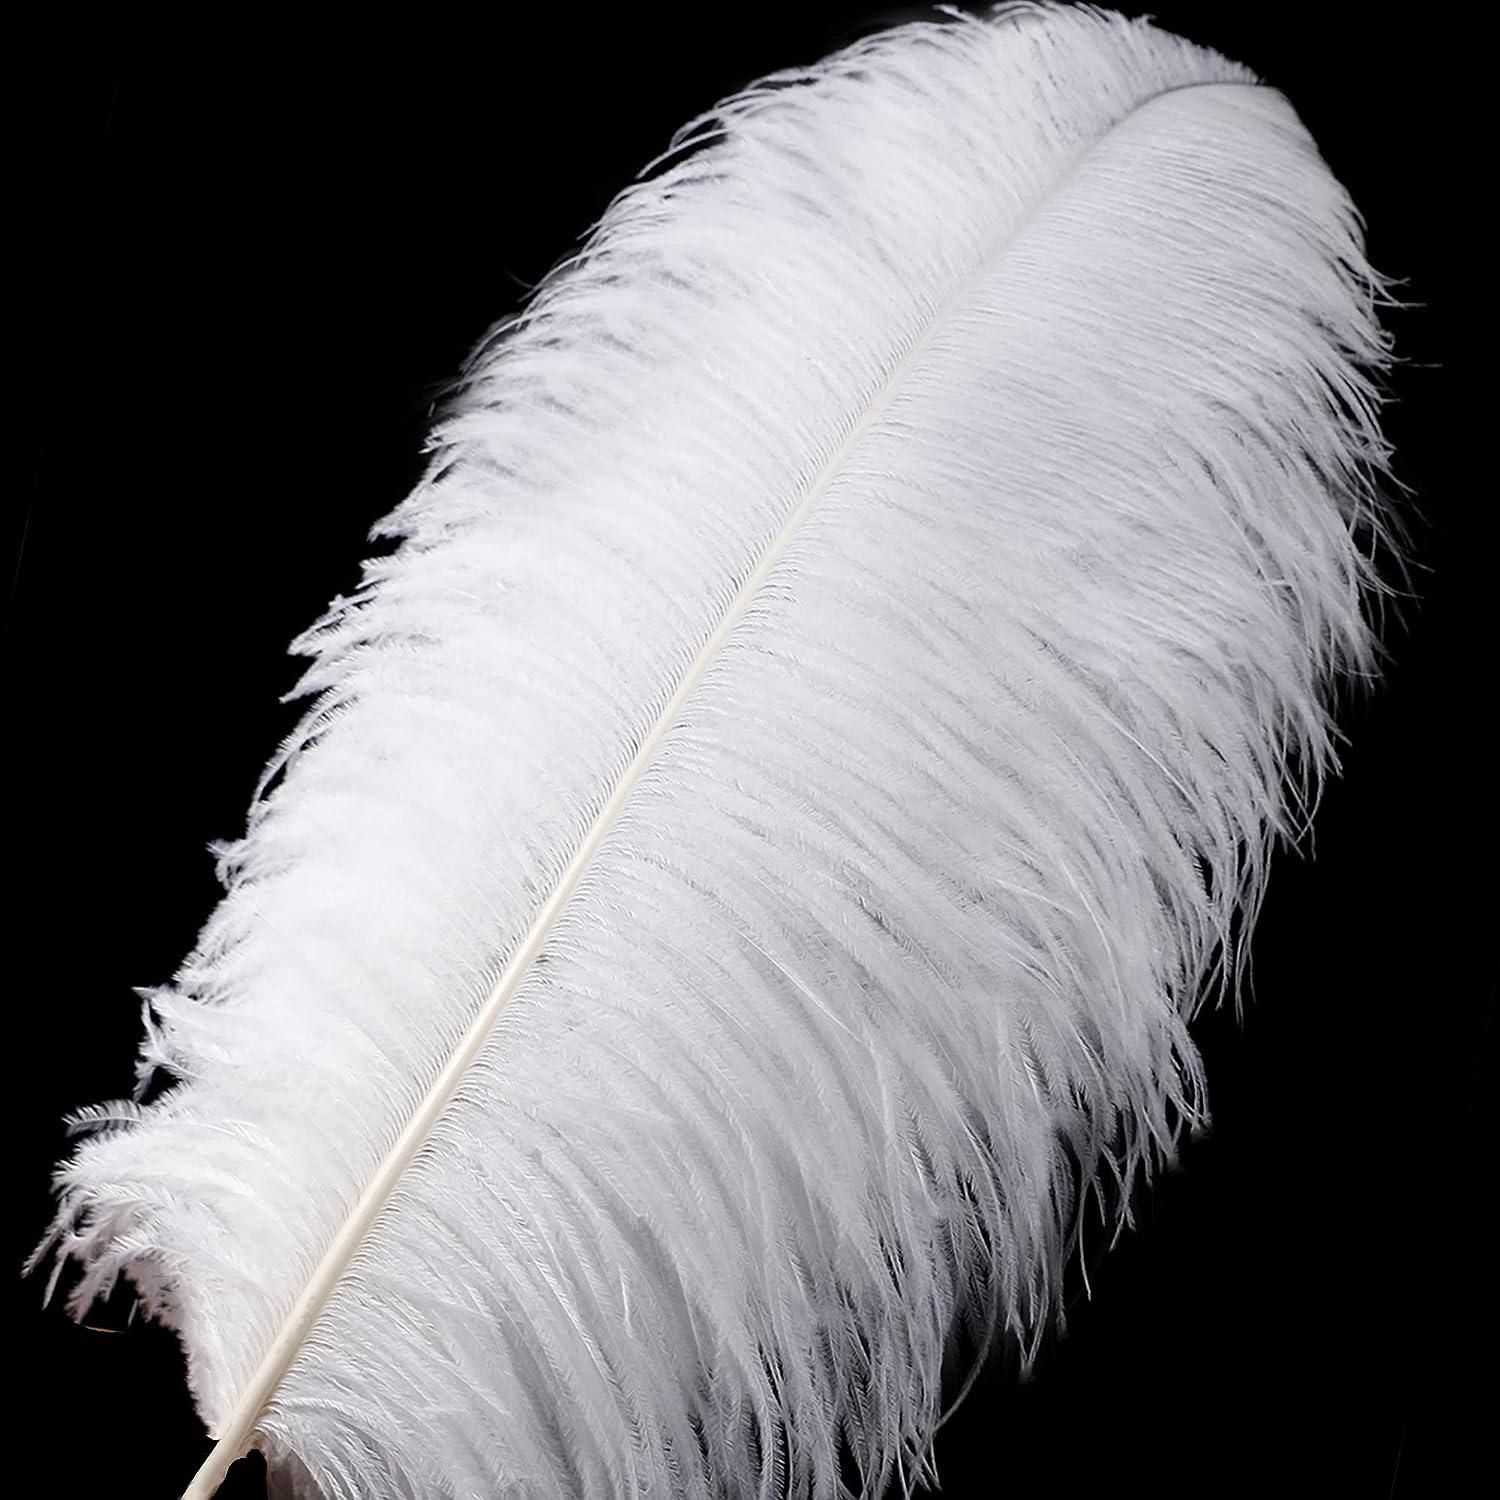 Larryhot Natural Peacock Feathers Bulk - 40pcs 10-12 inches Feathers for  DIY Crafts, Wedding, Home and Holiday Party Decorations 